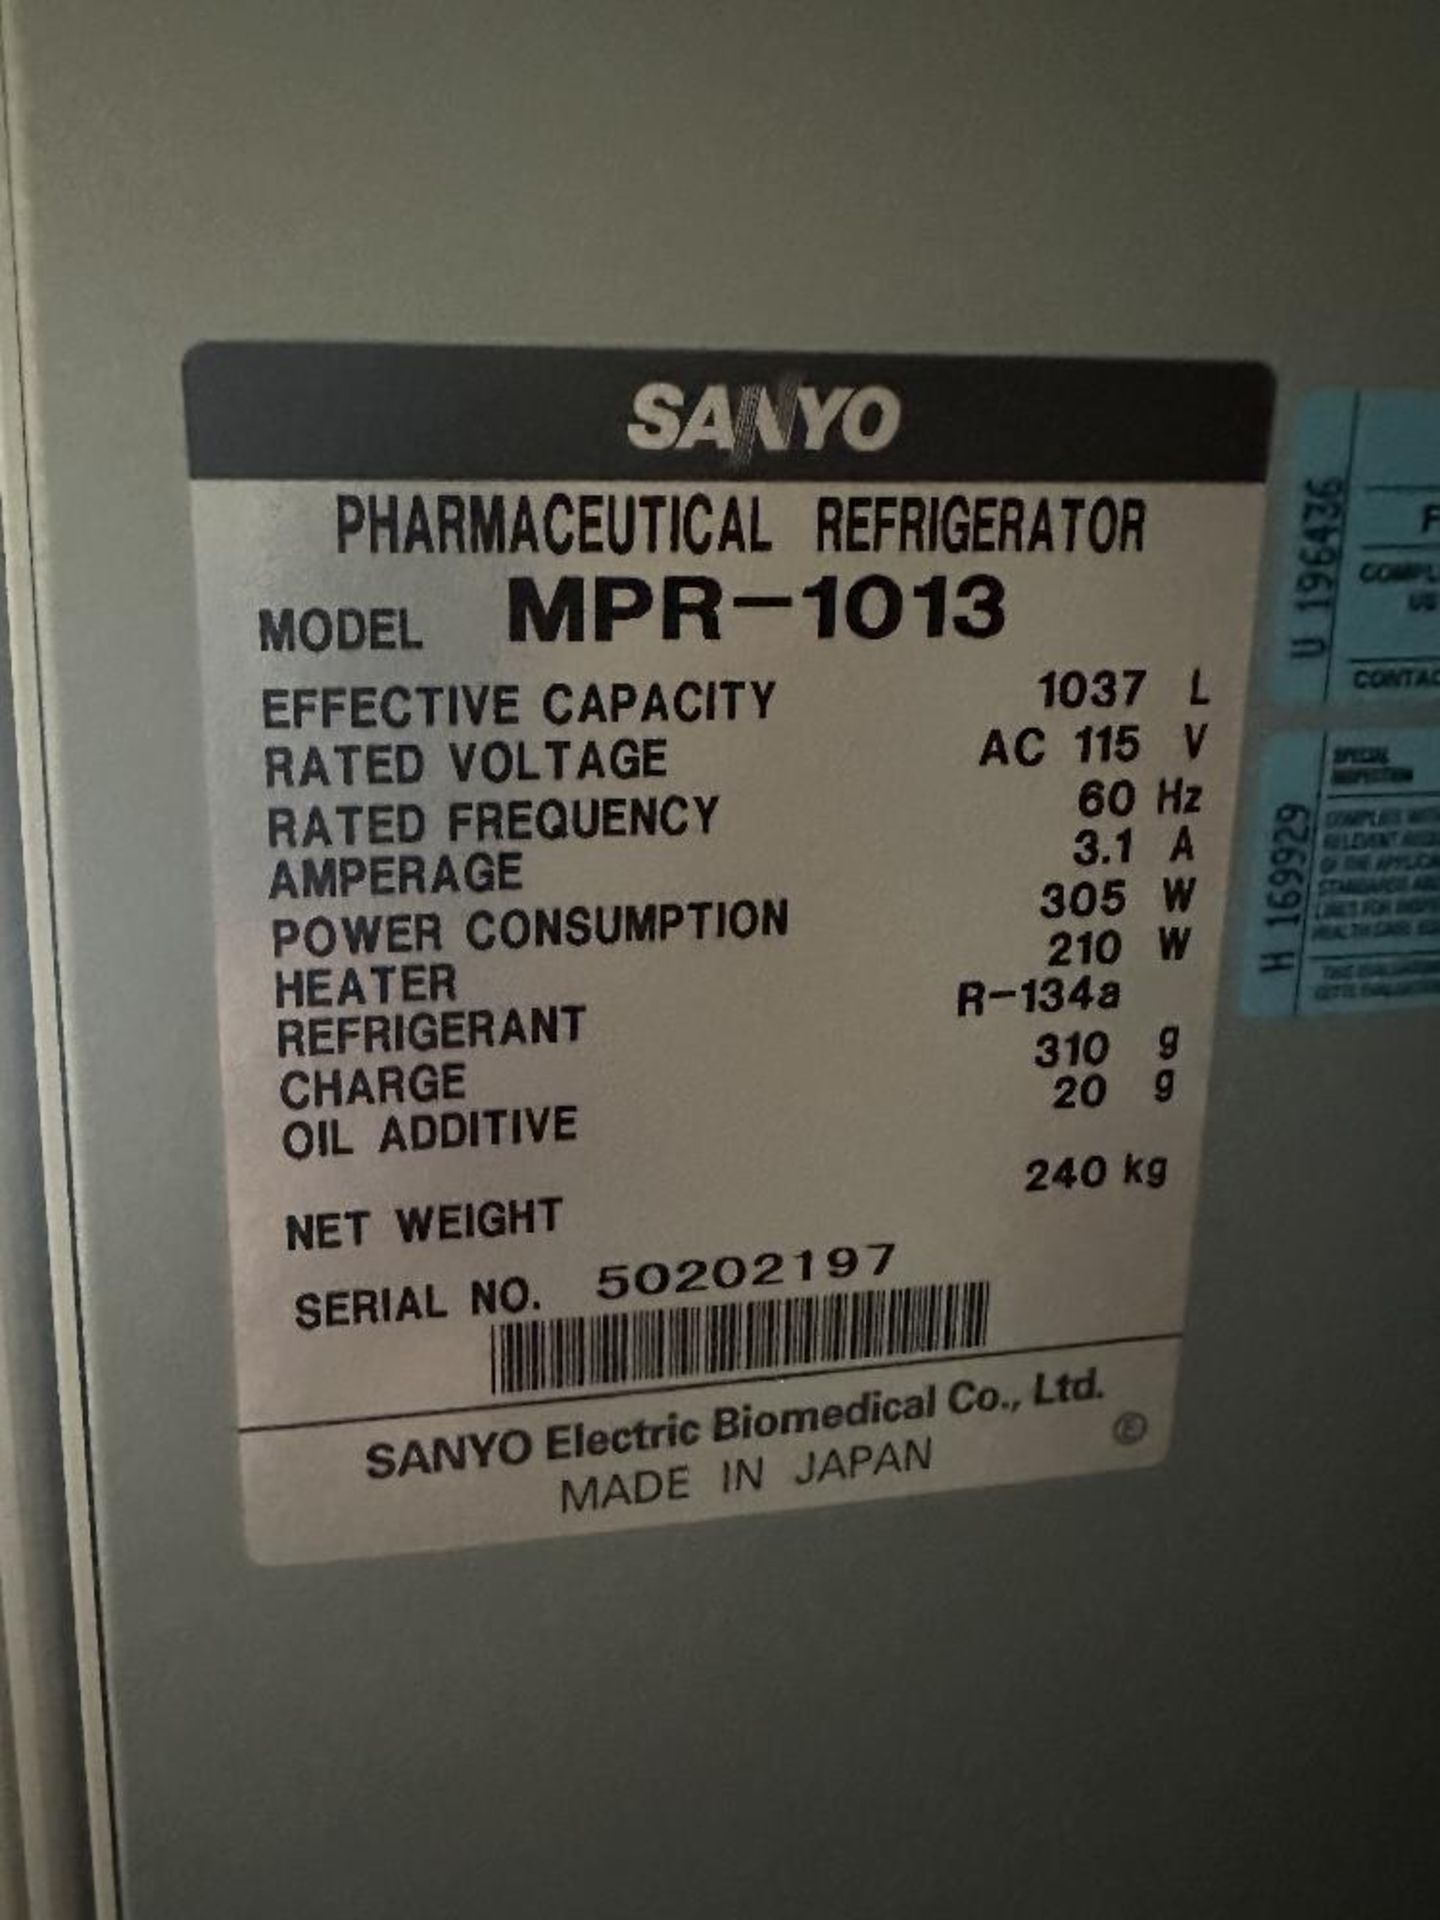 Sanyo MPR-1013 Pharmaceutical Refrigerator (LOCATED IN MIDDLETOWN, N.Y.)-FOR PACKAGING & SHIPPING - Image 6 of 6